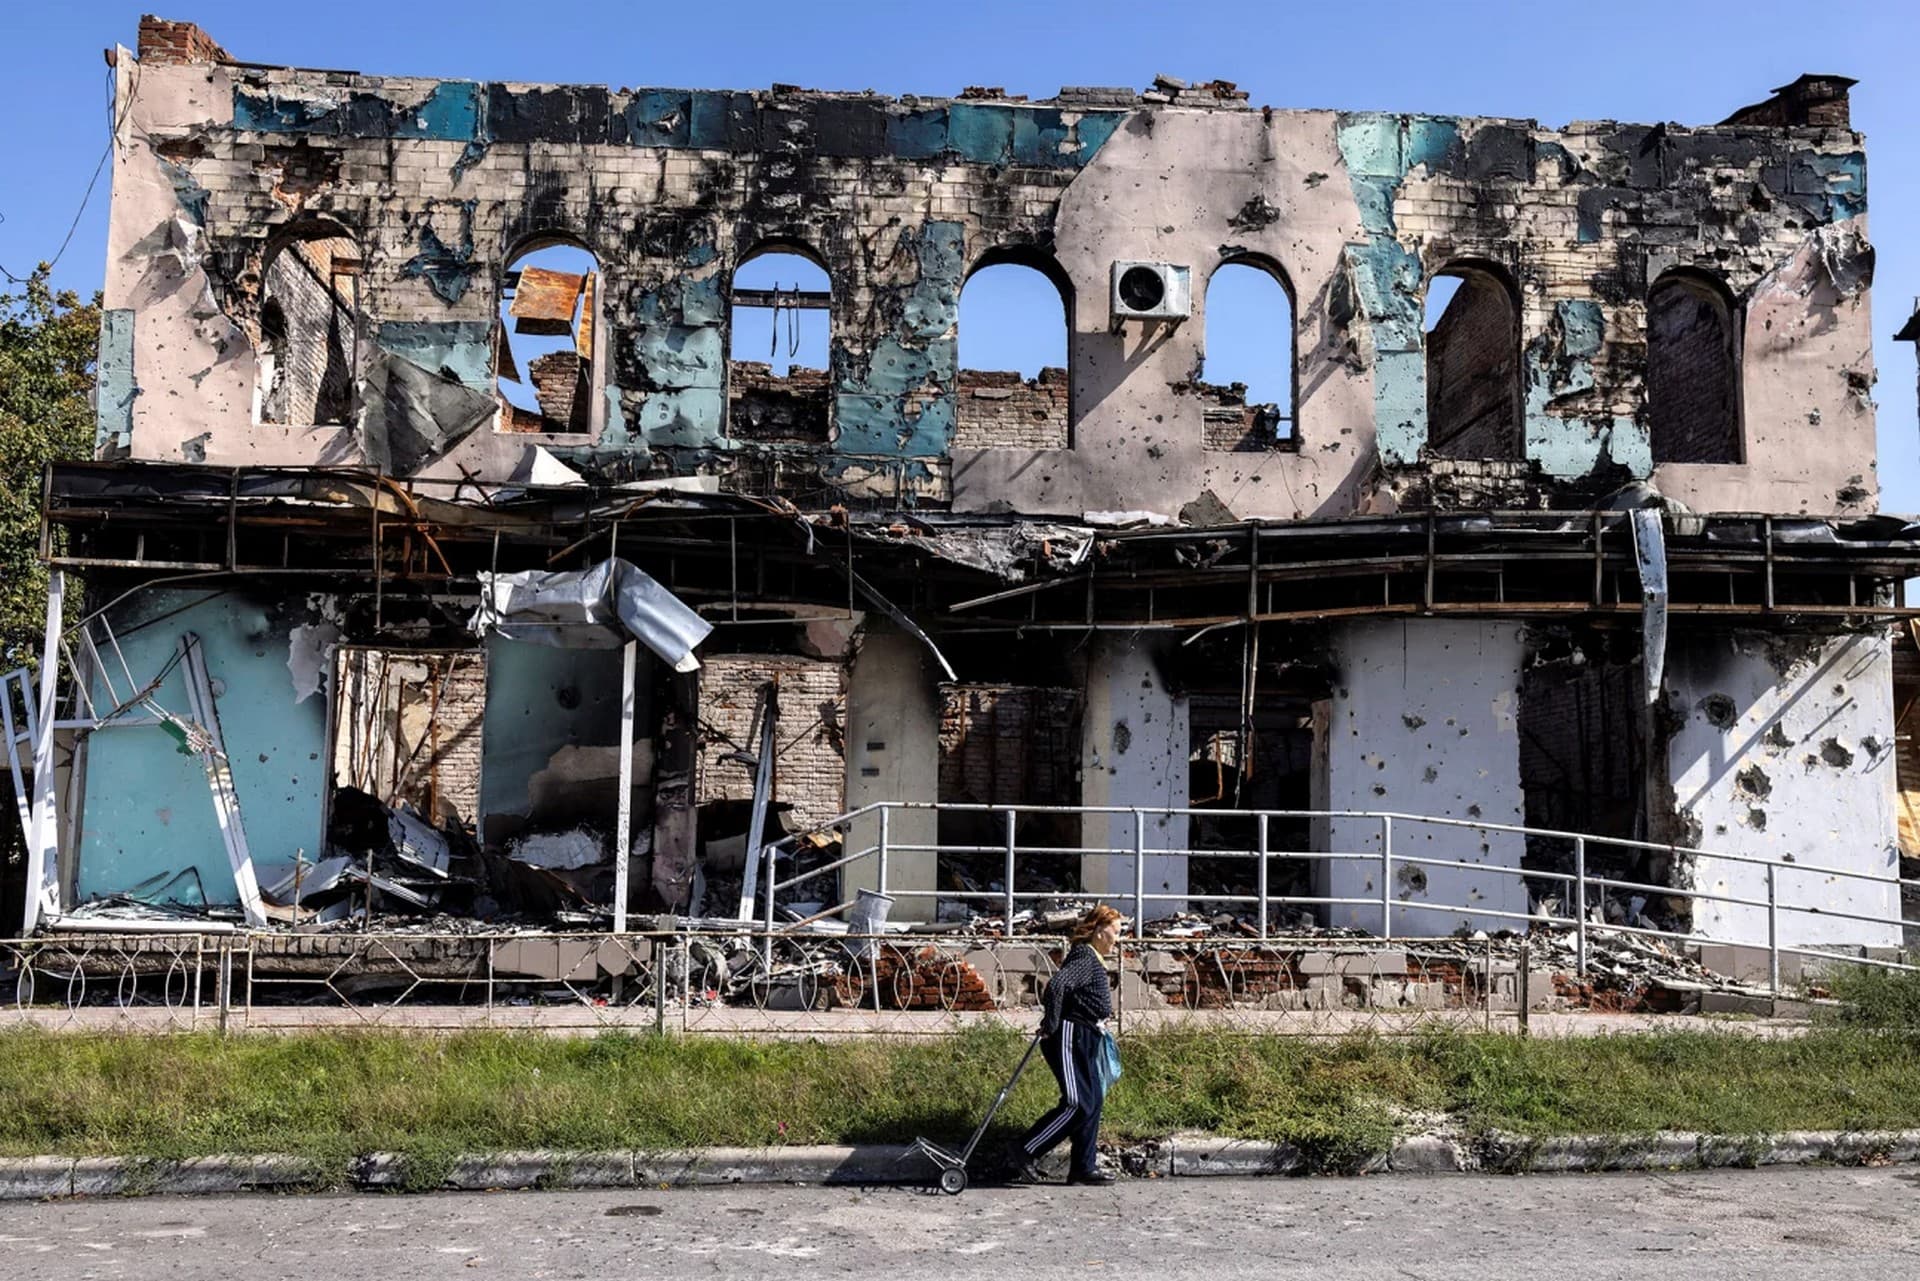 A woman walks past a destroyed building, as Russia's attack on Ukraine continues, in the town of Izium